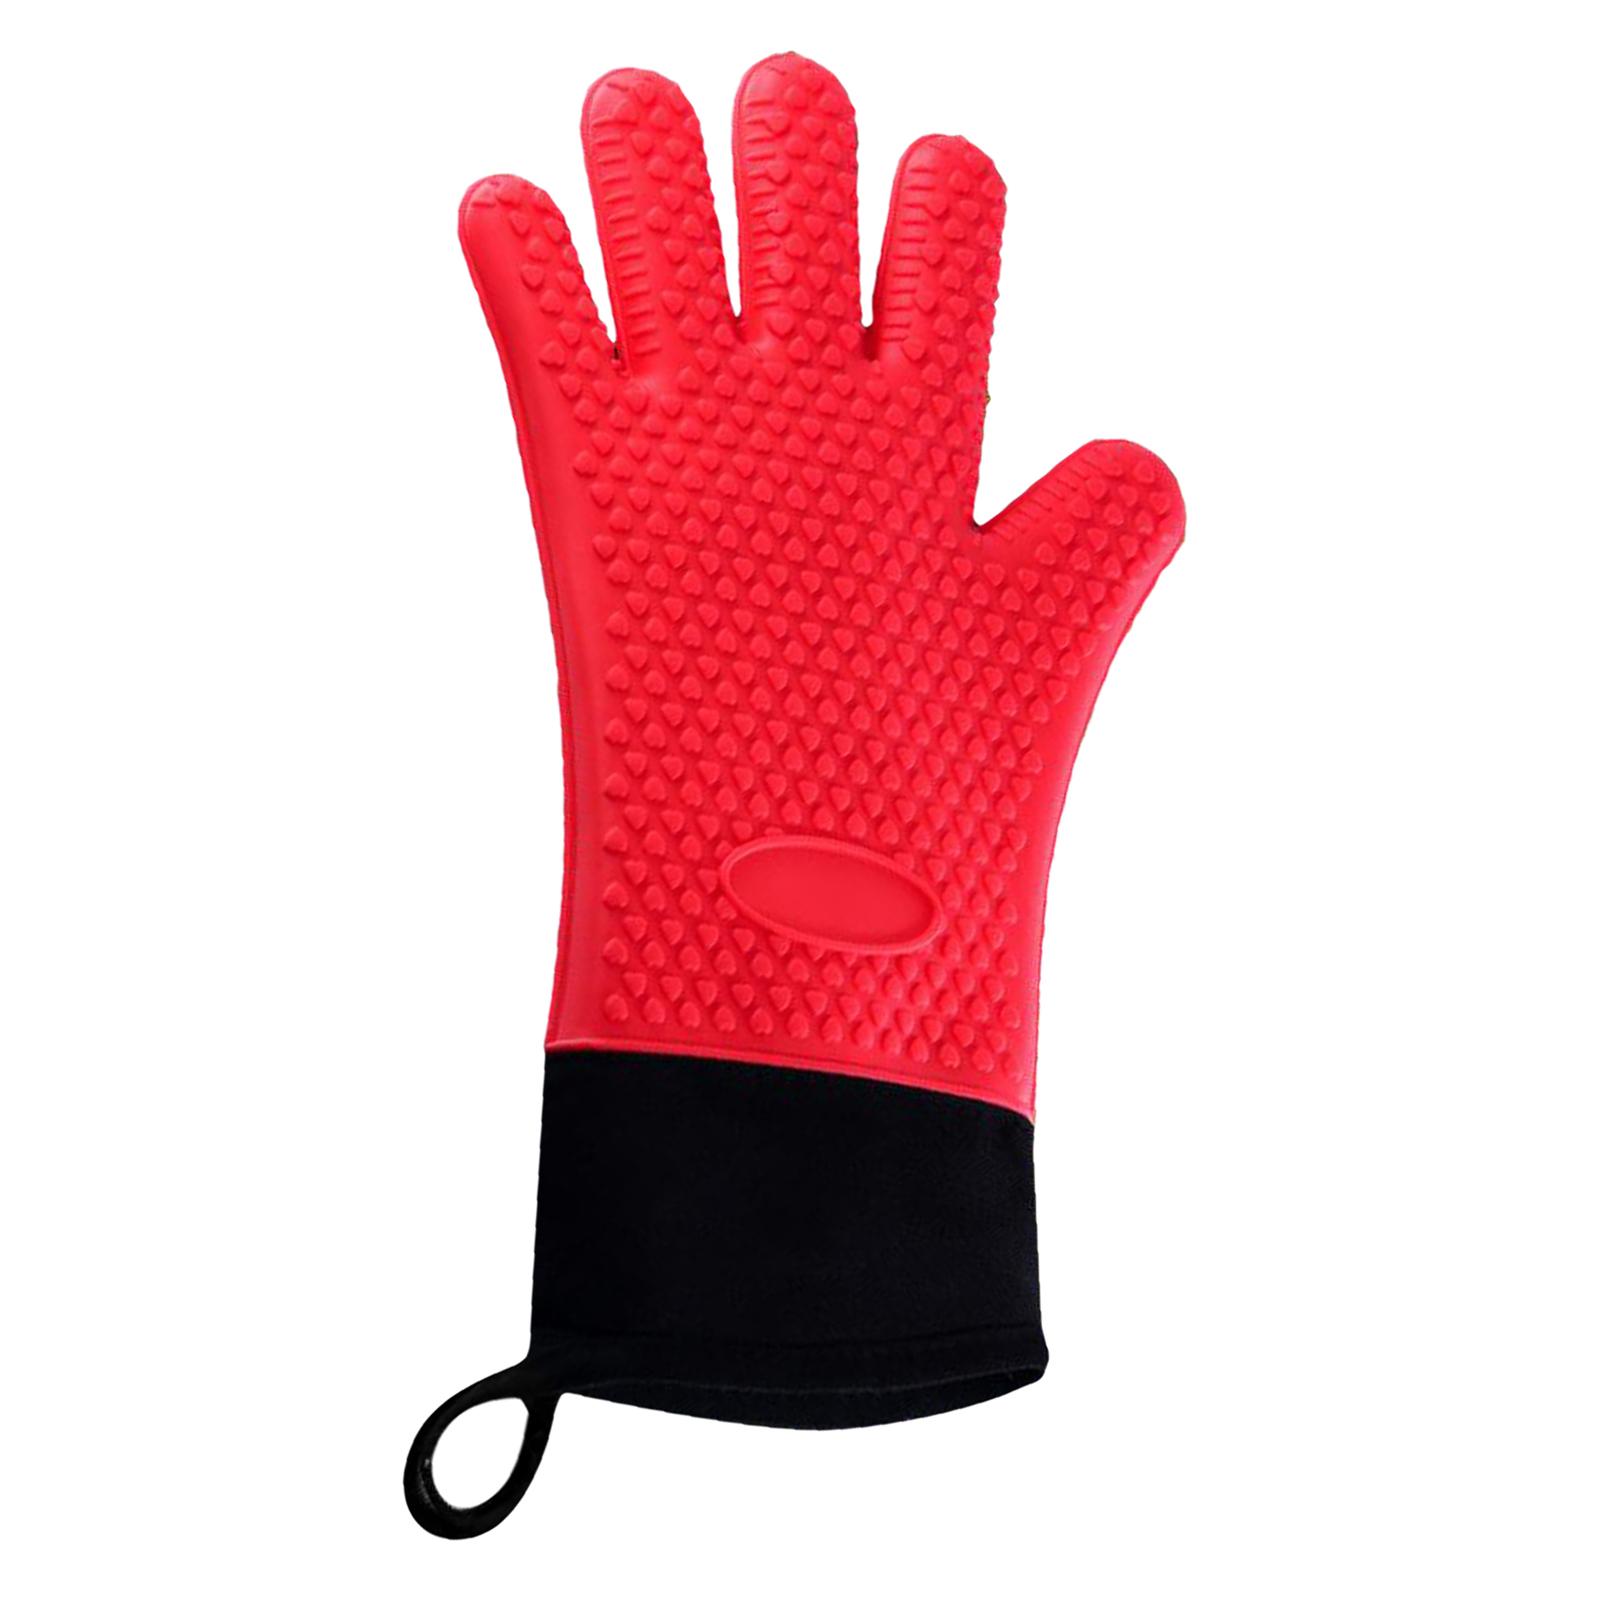 Oven Gloves, Heat Resistant Cooking Gloves Silicone Grilling Gloves Long Waterproof BBQ Kitchen Oven Mitts with Inner Cotton Layer for BBQ, Cooking